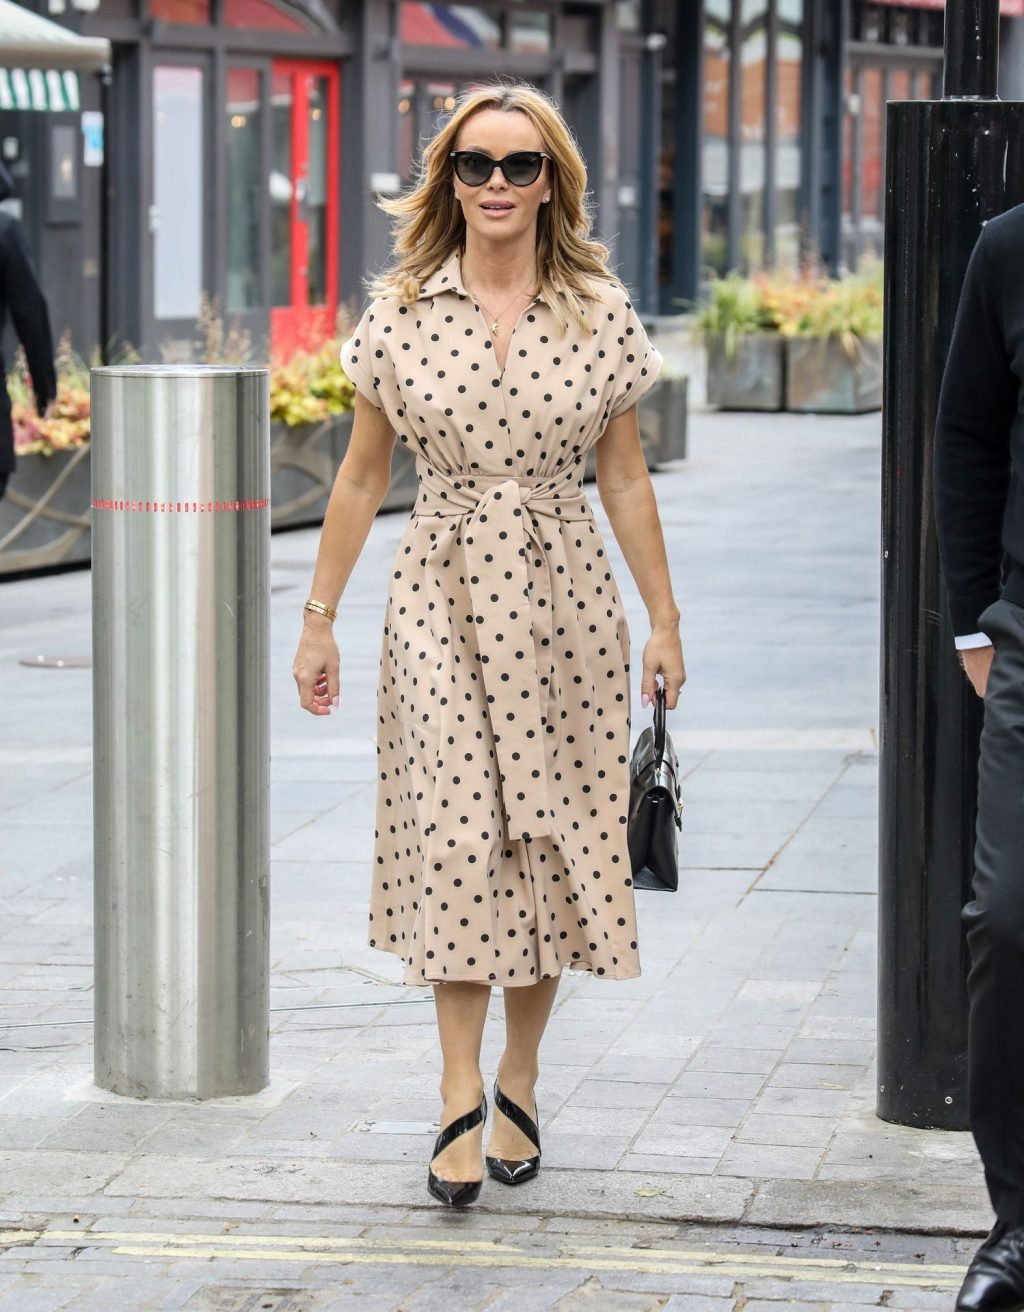 Amanda Holden is Pictured Leaving the Global Studios (30 Photos)